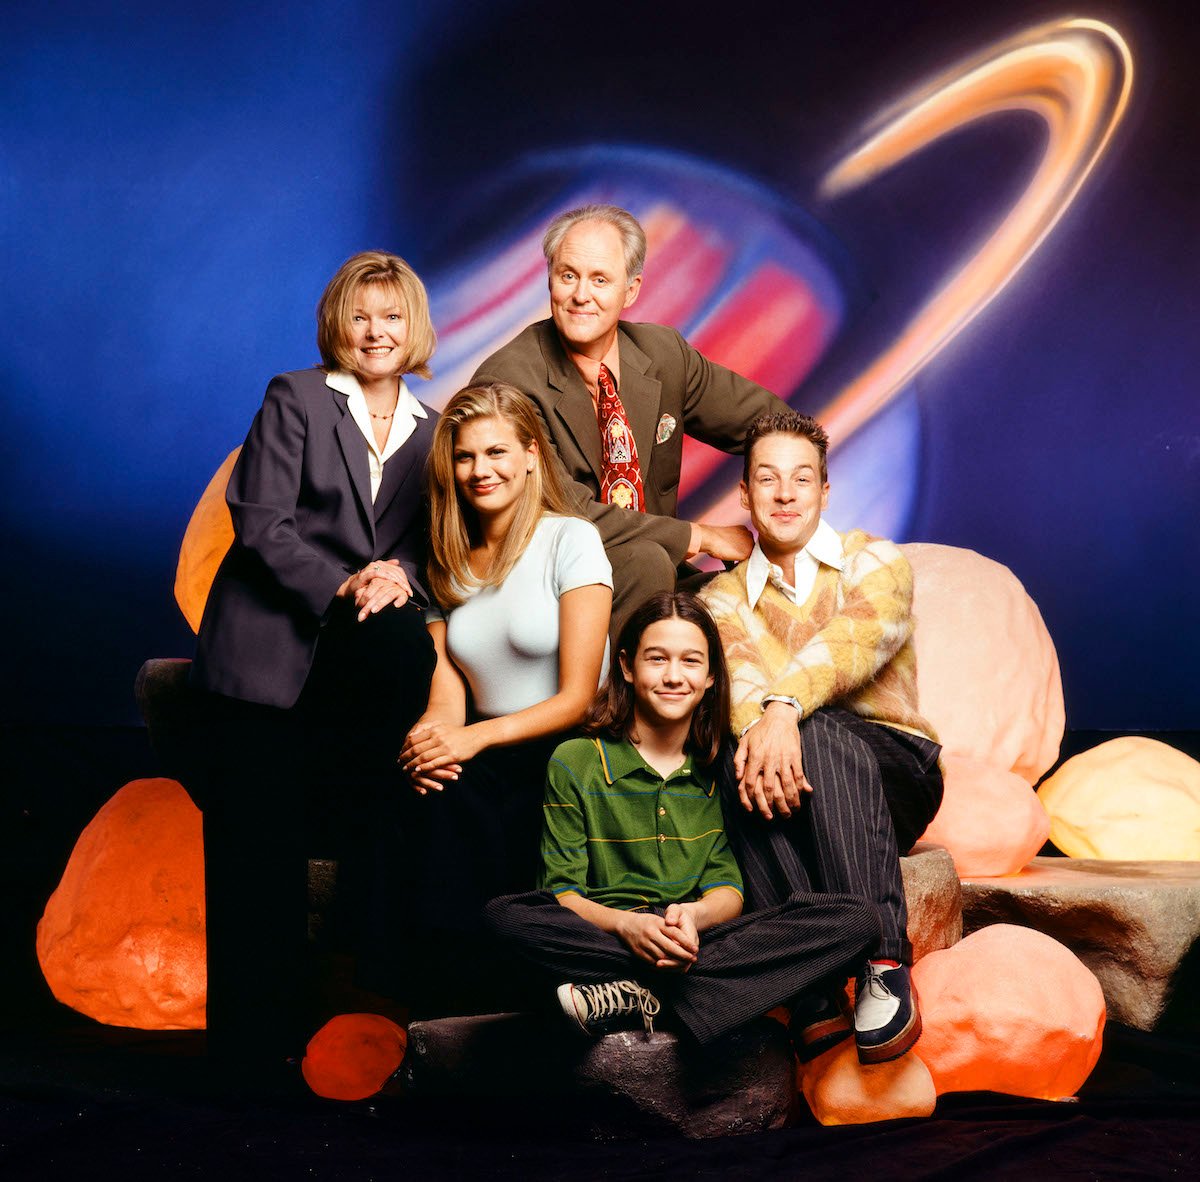 The cast of 3rd Rock from the Sun poses in front of a planet